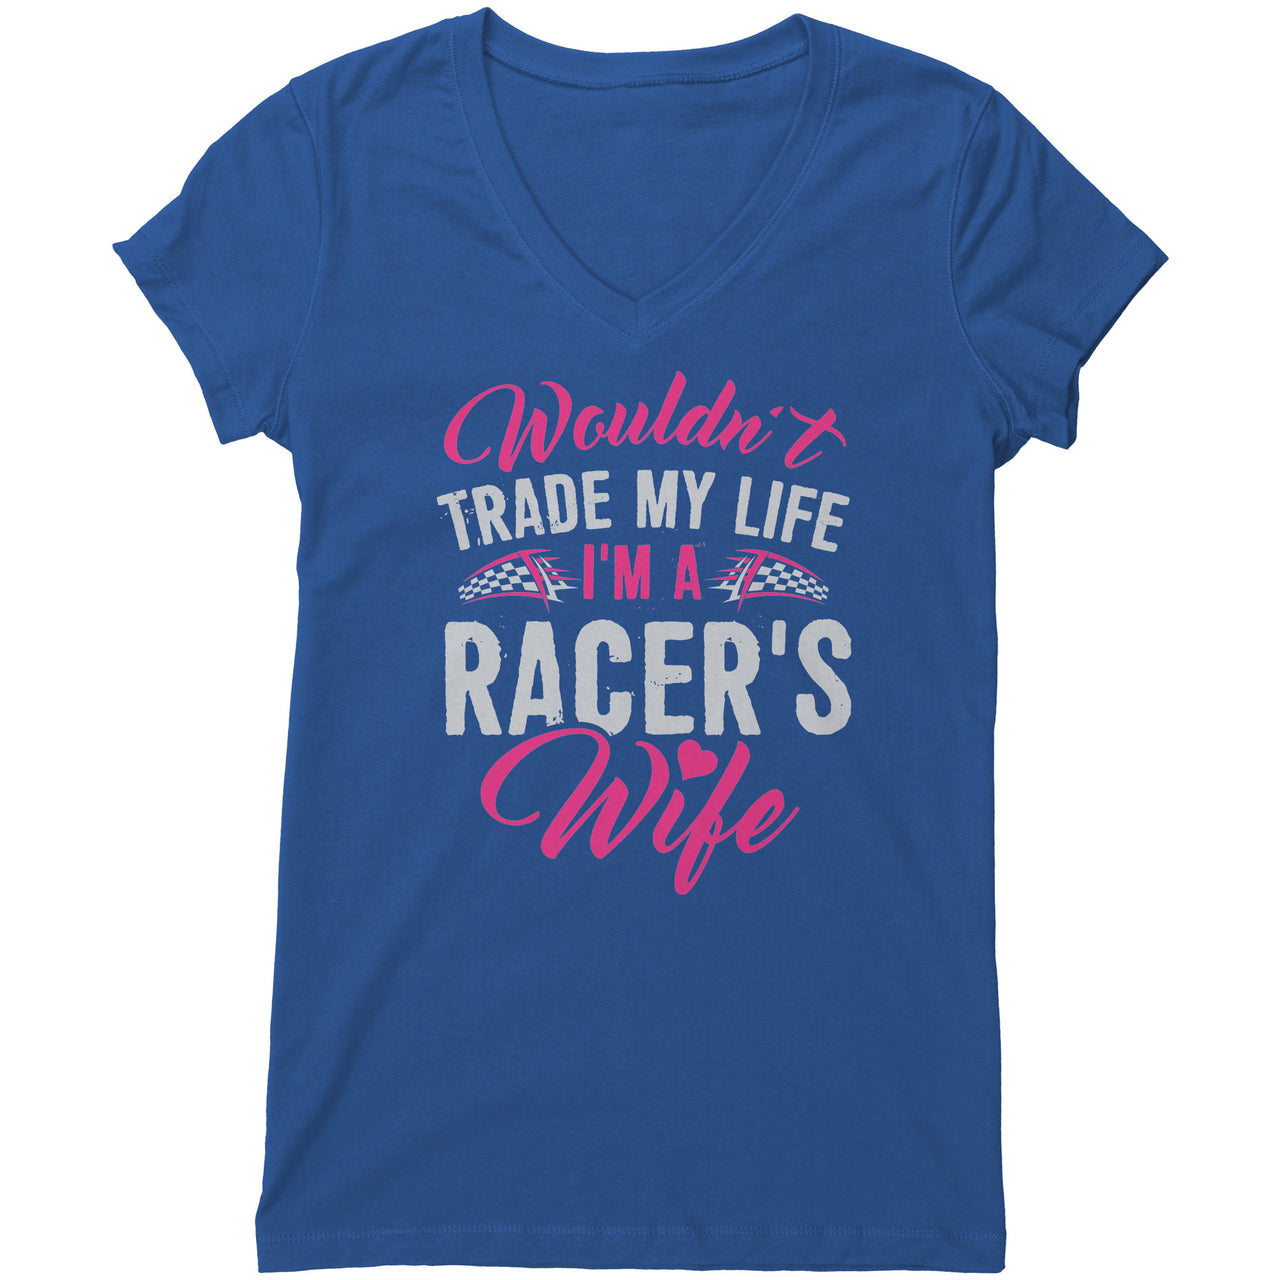 Wouldn't Trade My Life I'm A Racer's Wife Tees